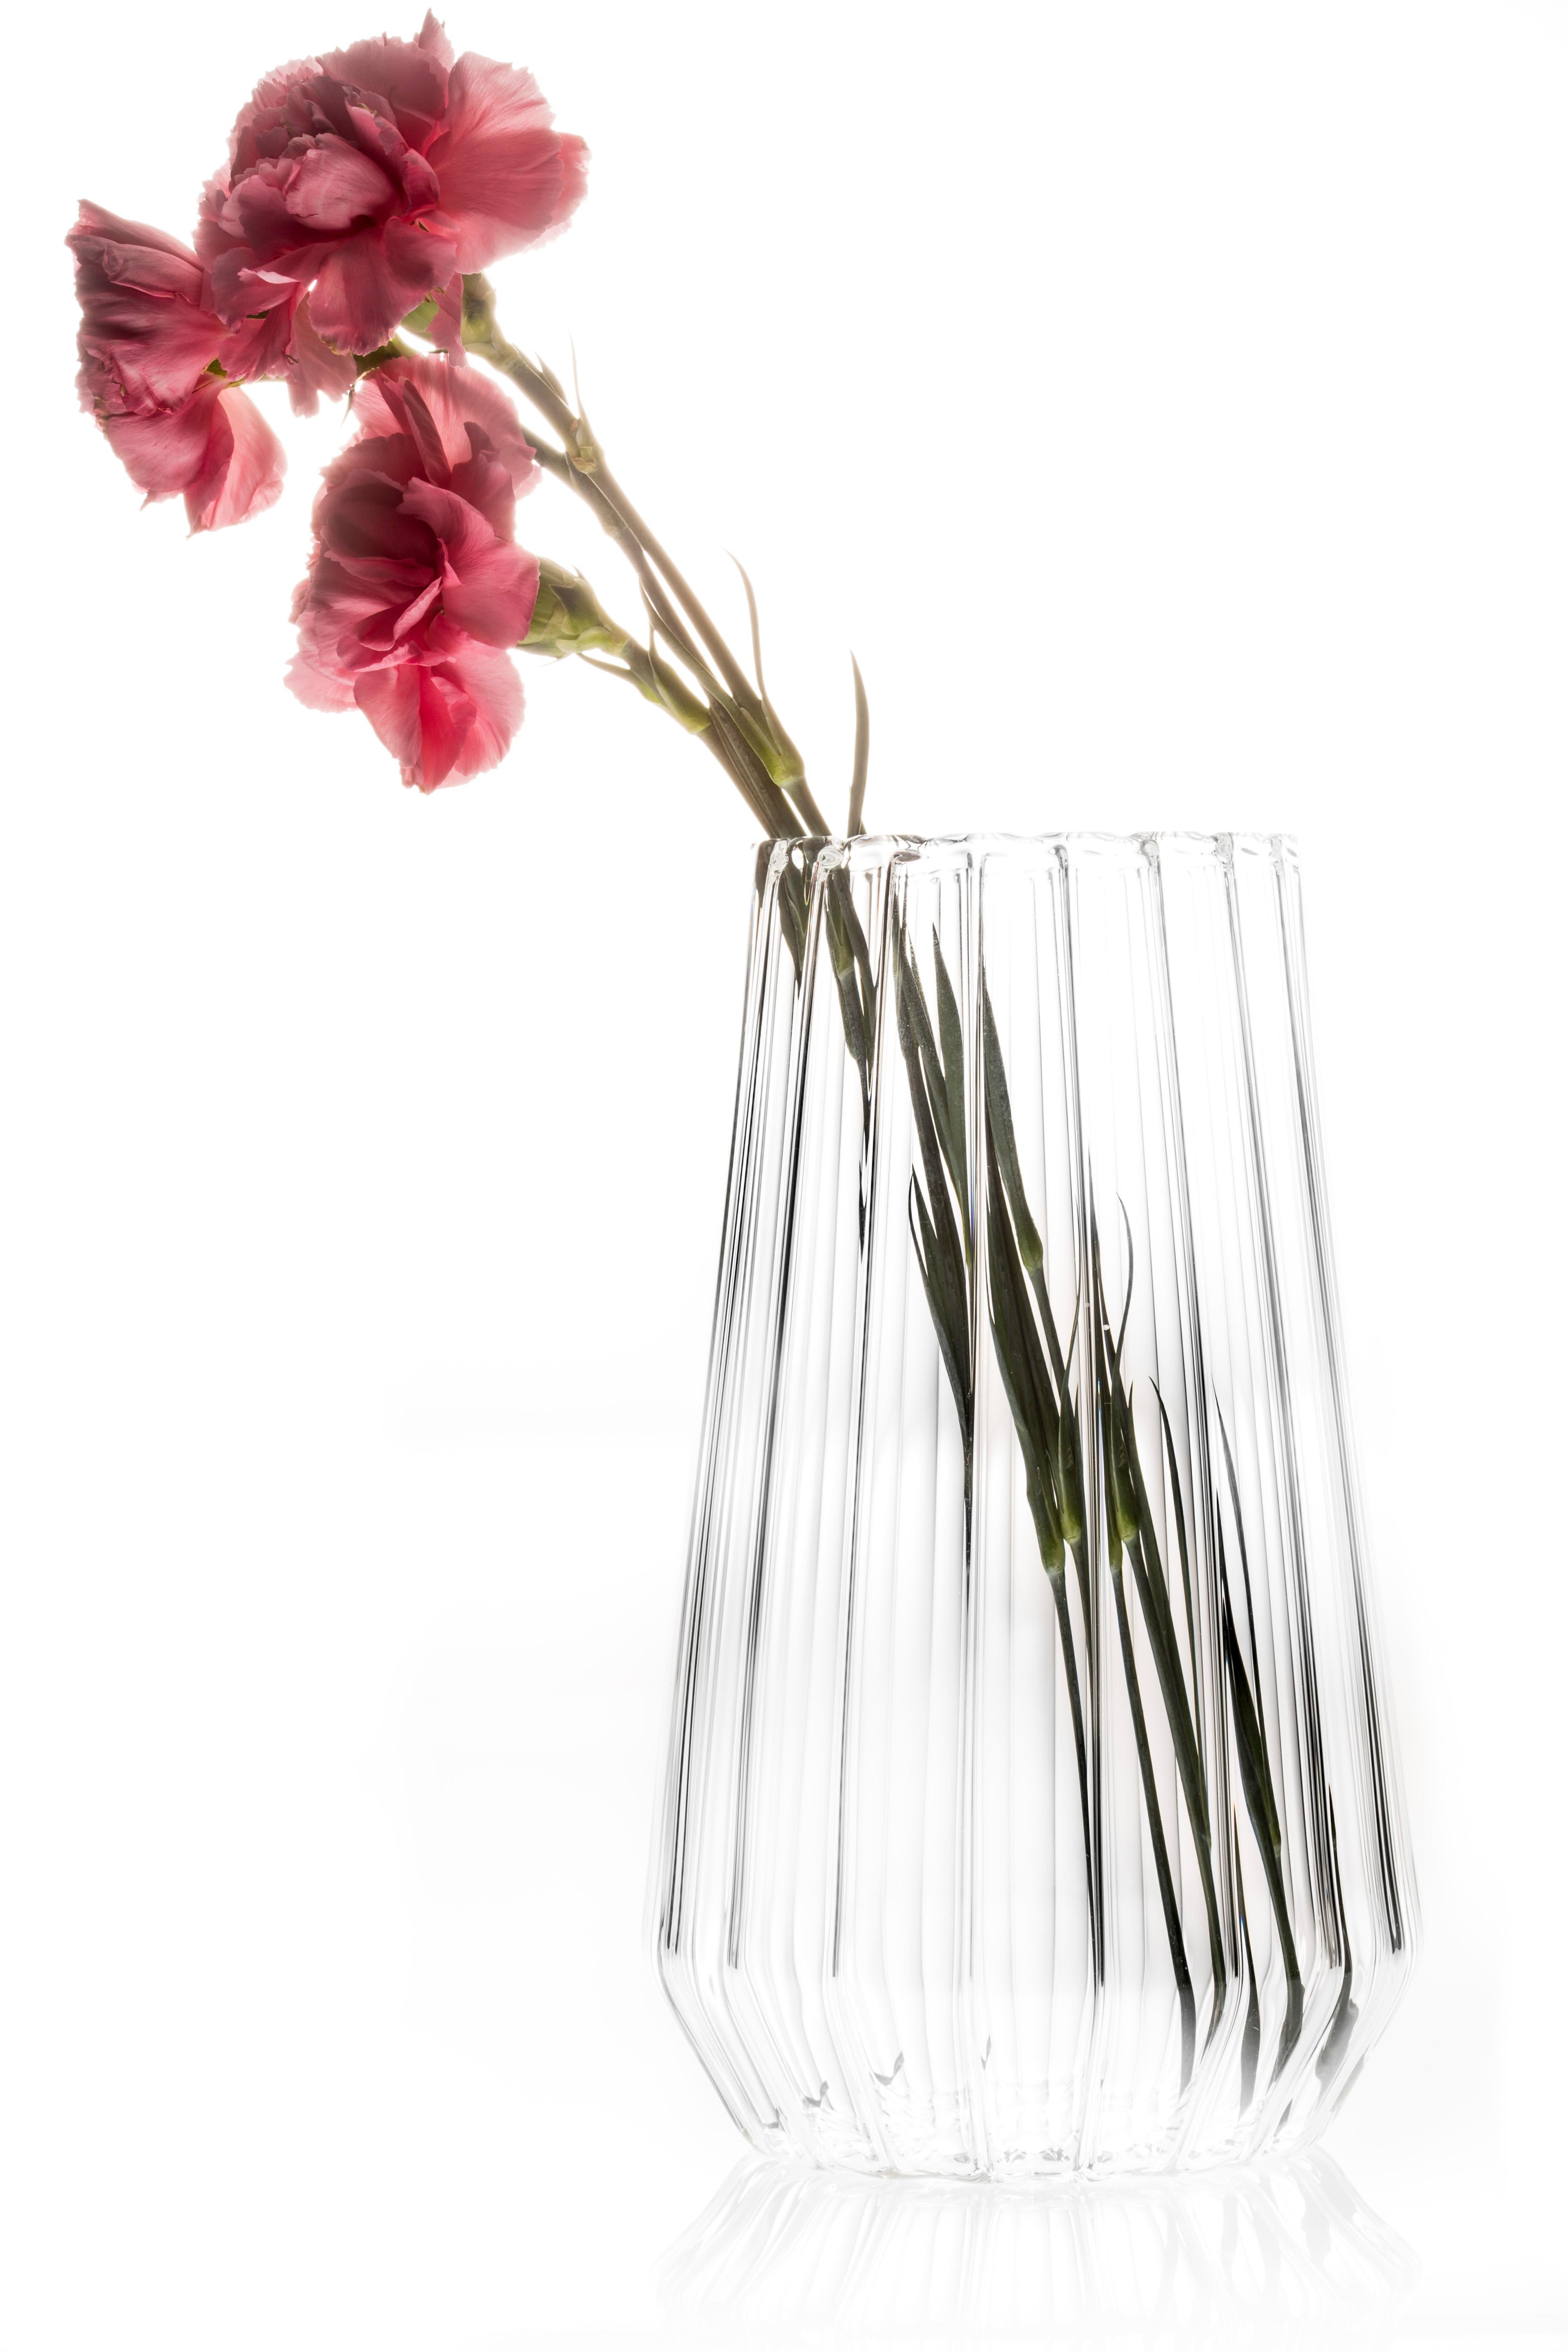 STELLA LARGE VASE

Pure in form, the lenticular effect of the fluted glass masks the stems and showcases the flower heads. The facet near the bottom serves as a marker for the water line and keeps
the visual effect of the vase is clean and